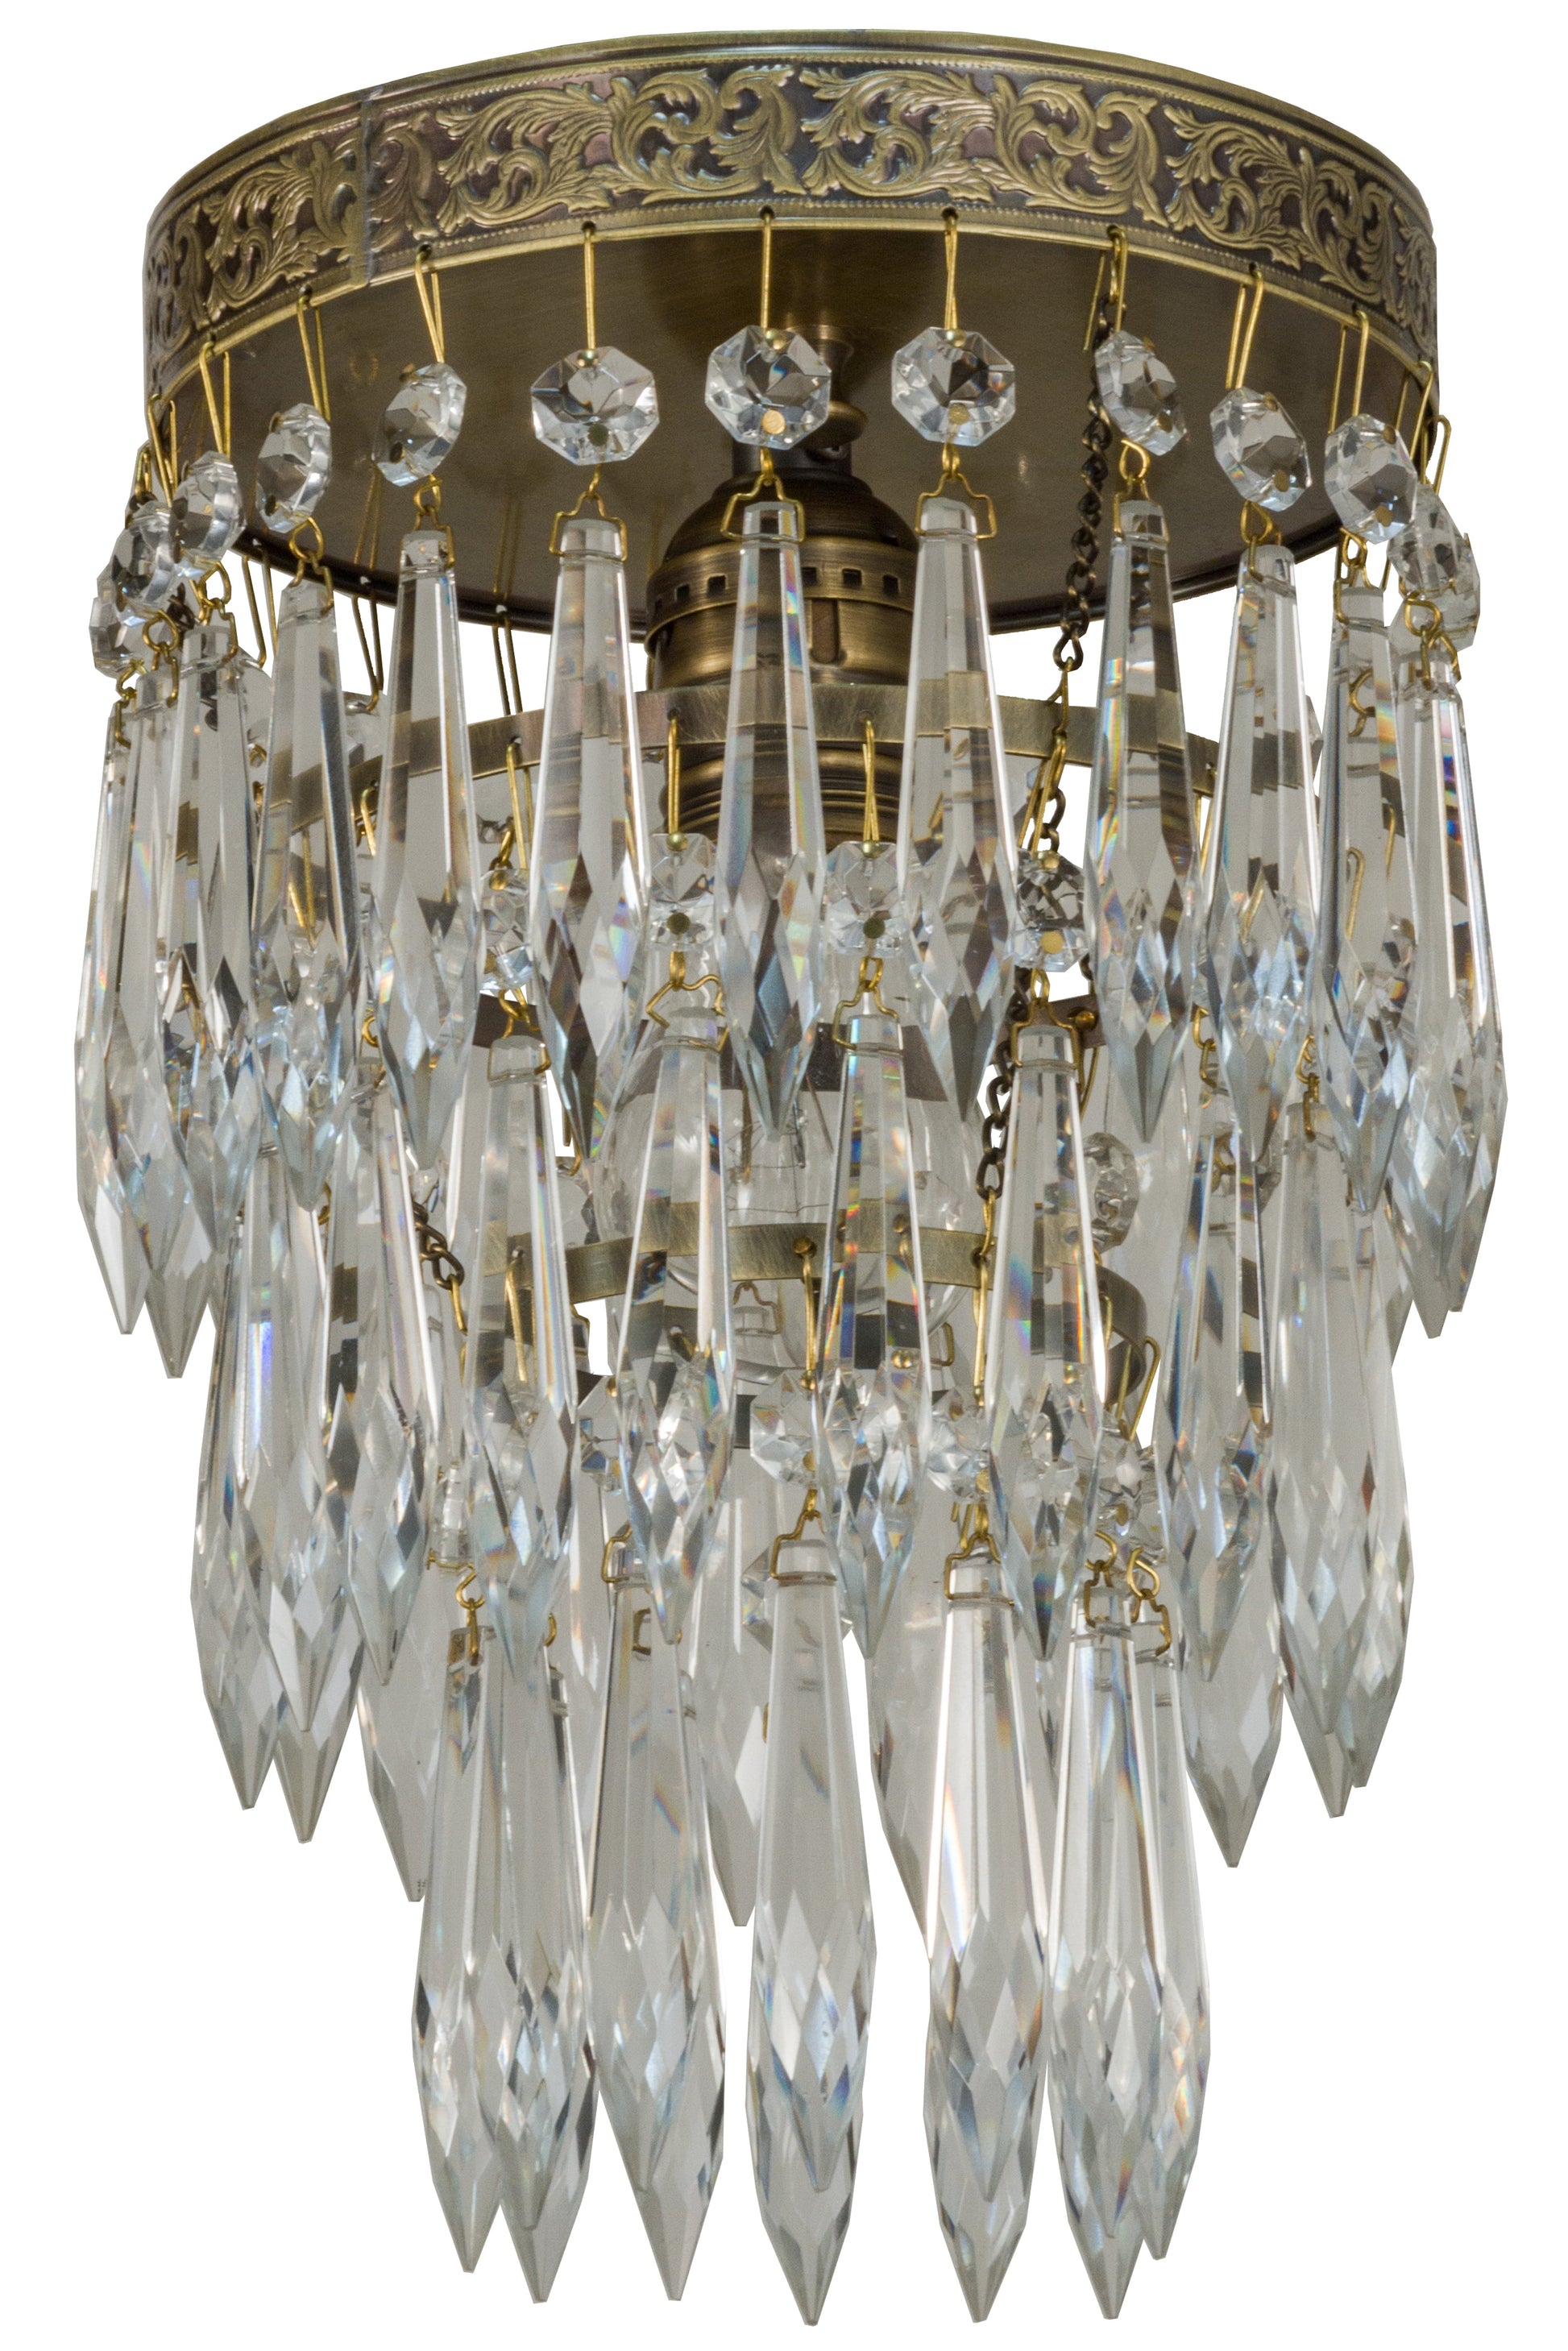 6" Finnimore Crystal Flushmount by 2nd Ave Lighting